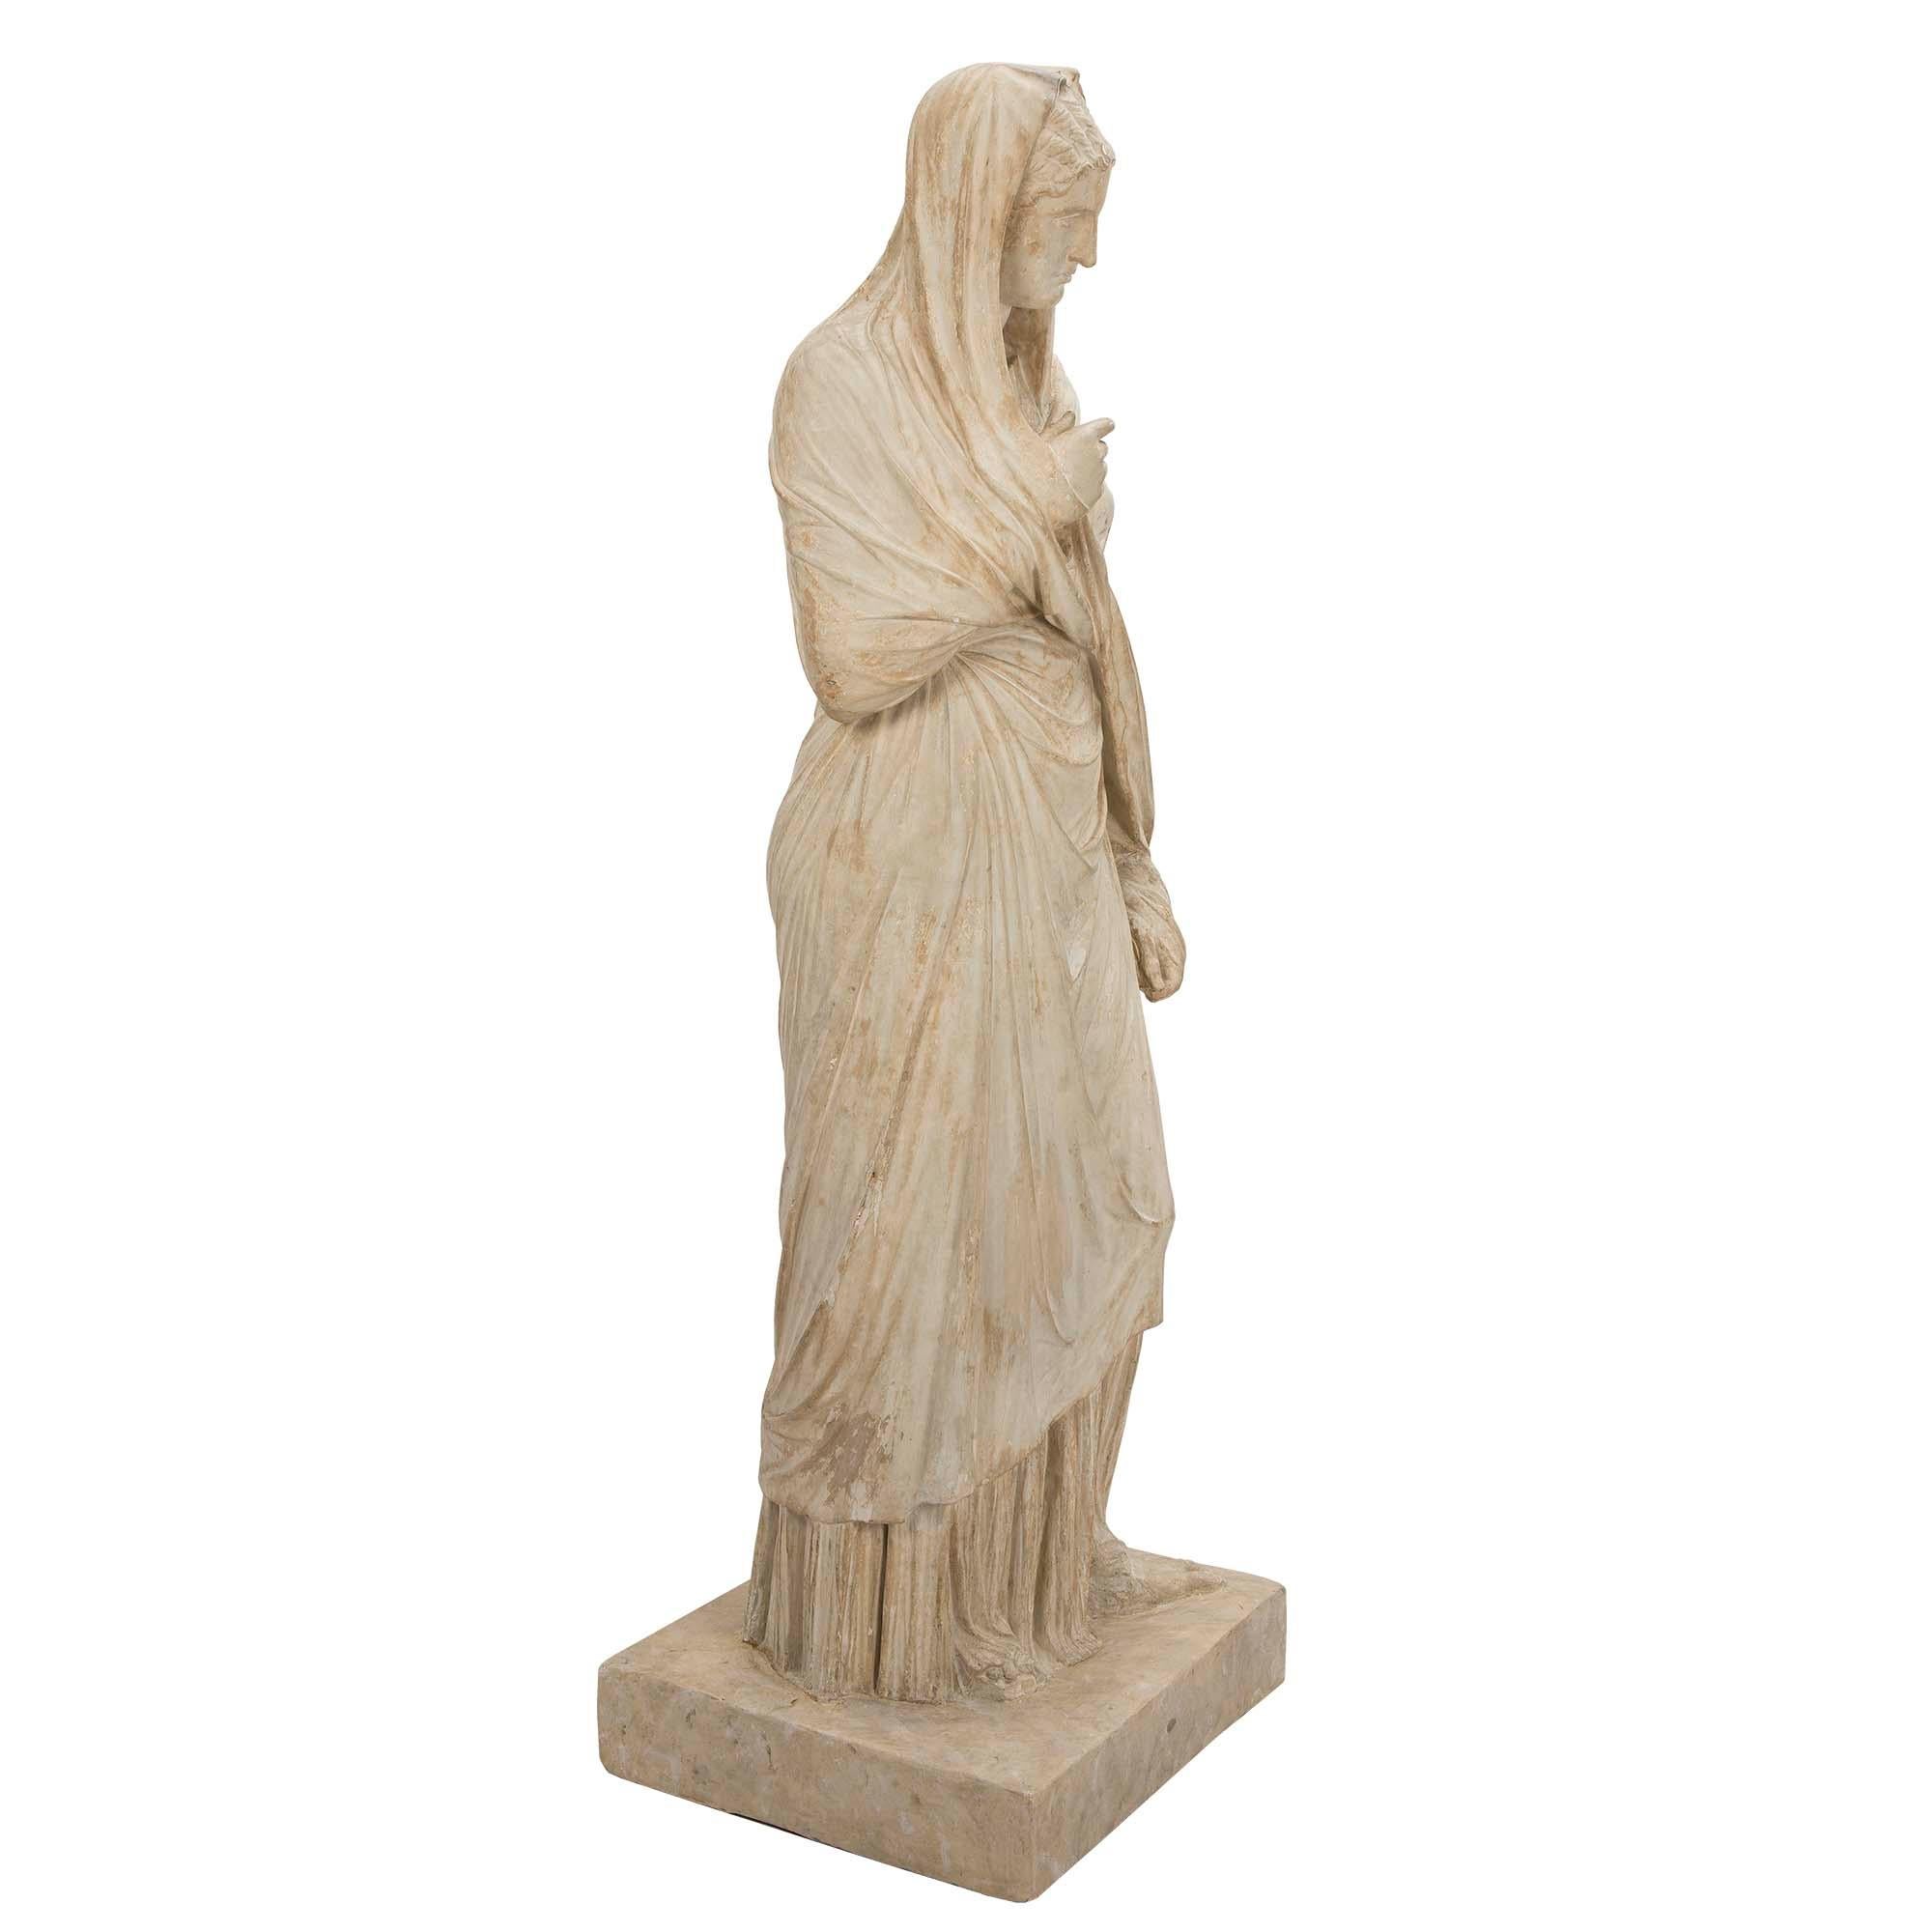 A most elegant American 19th century plaster statue of a classical maiden signed PP Caproni & Bro. Boston. The beautiful maiden is raised by a square base and is draped in wonderfully executed classical attire. Fabulous detail in the creases and